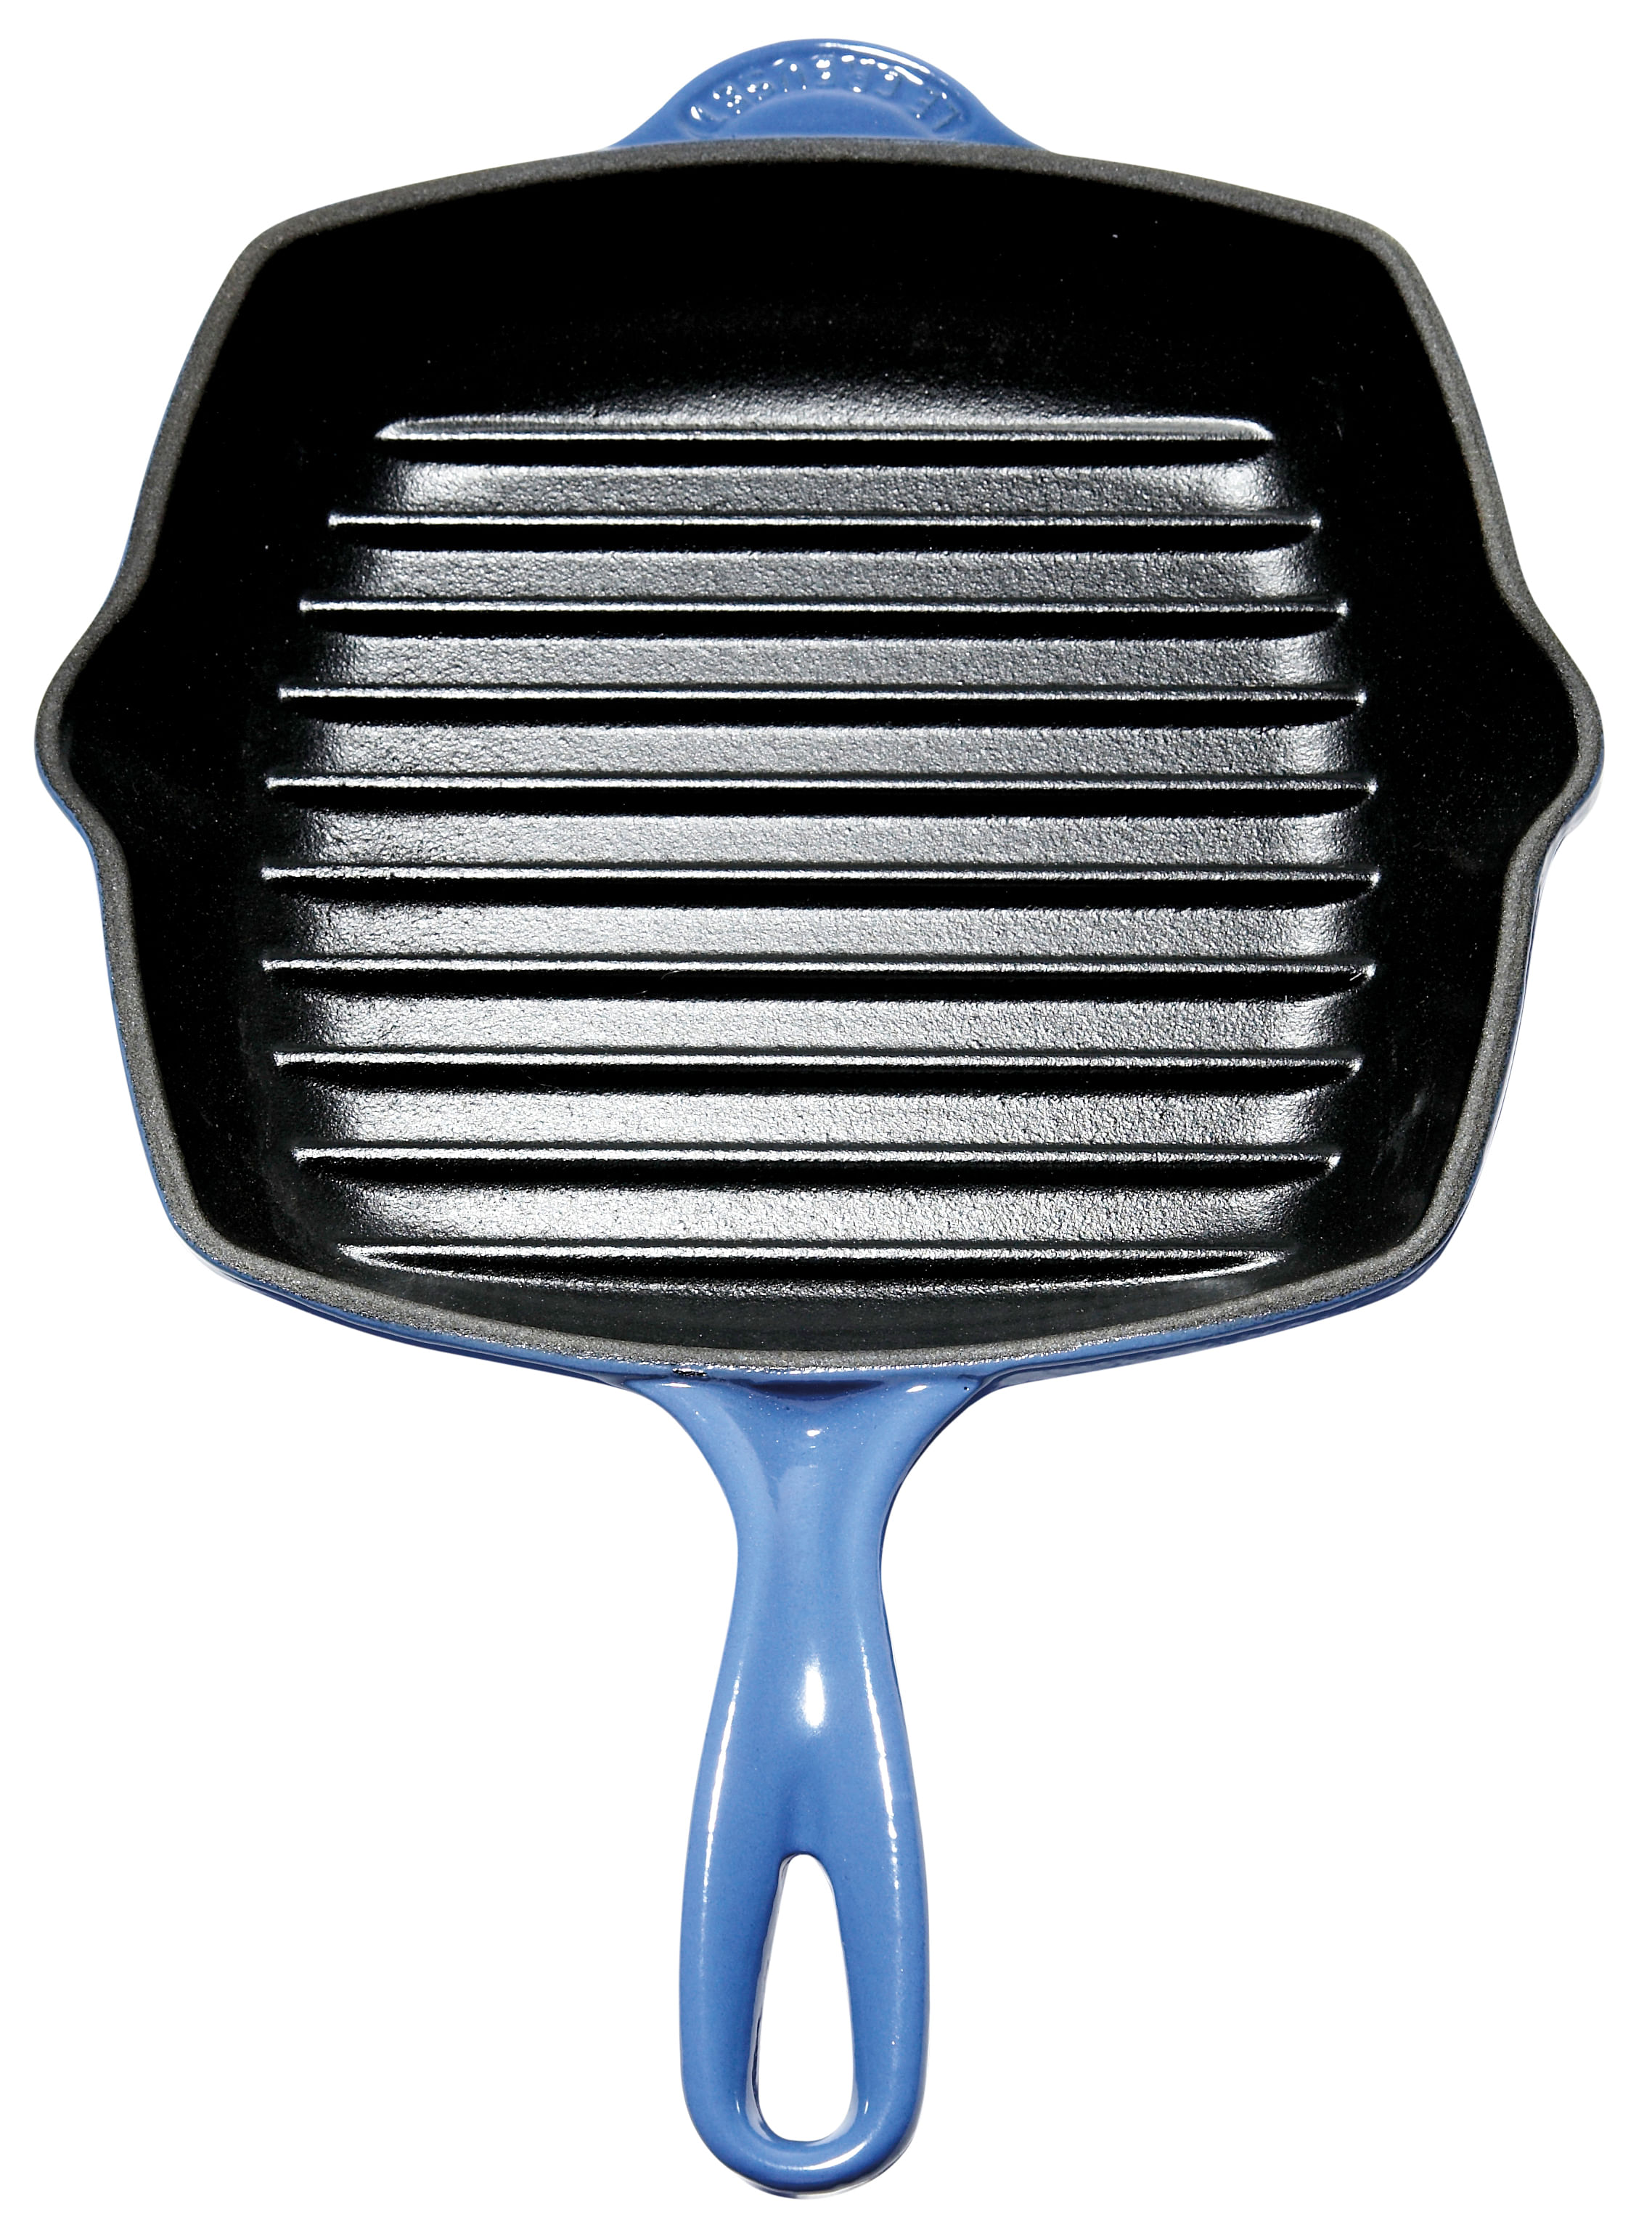 Product review: Ikea grill pan